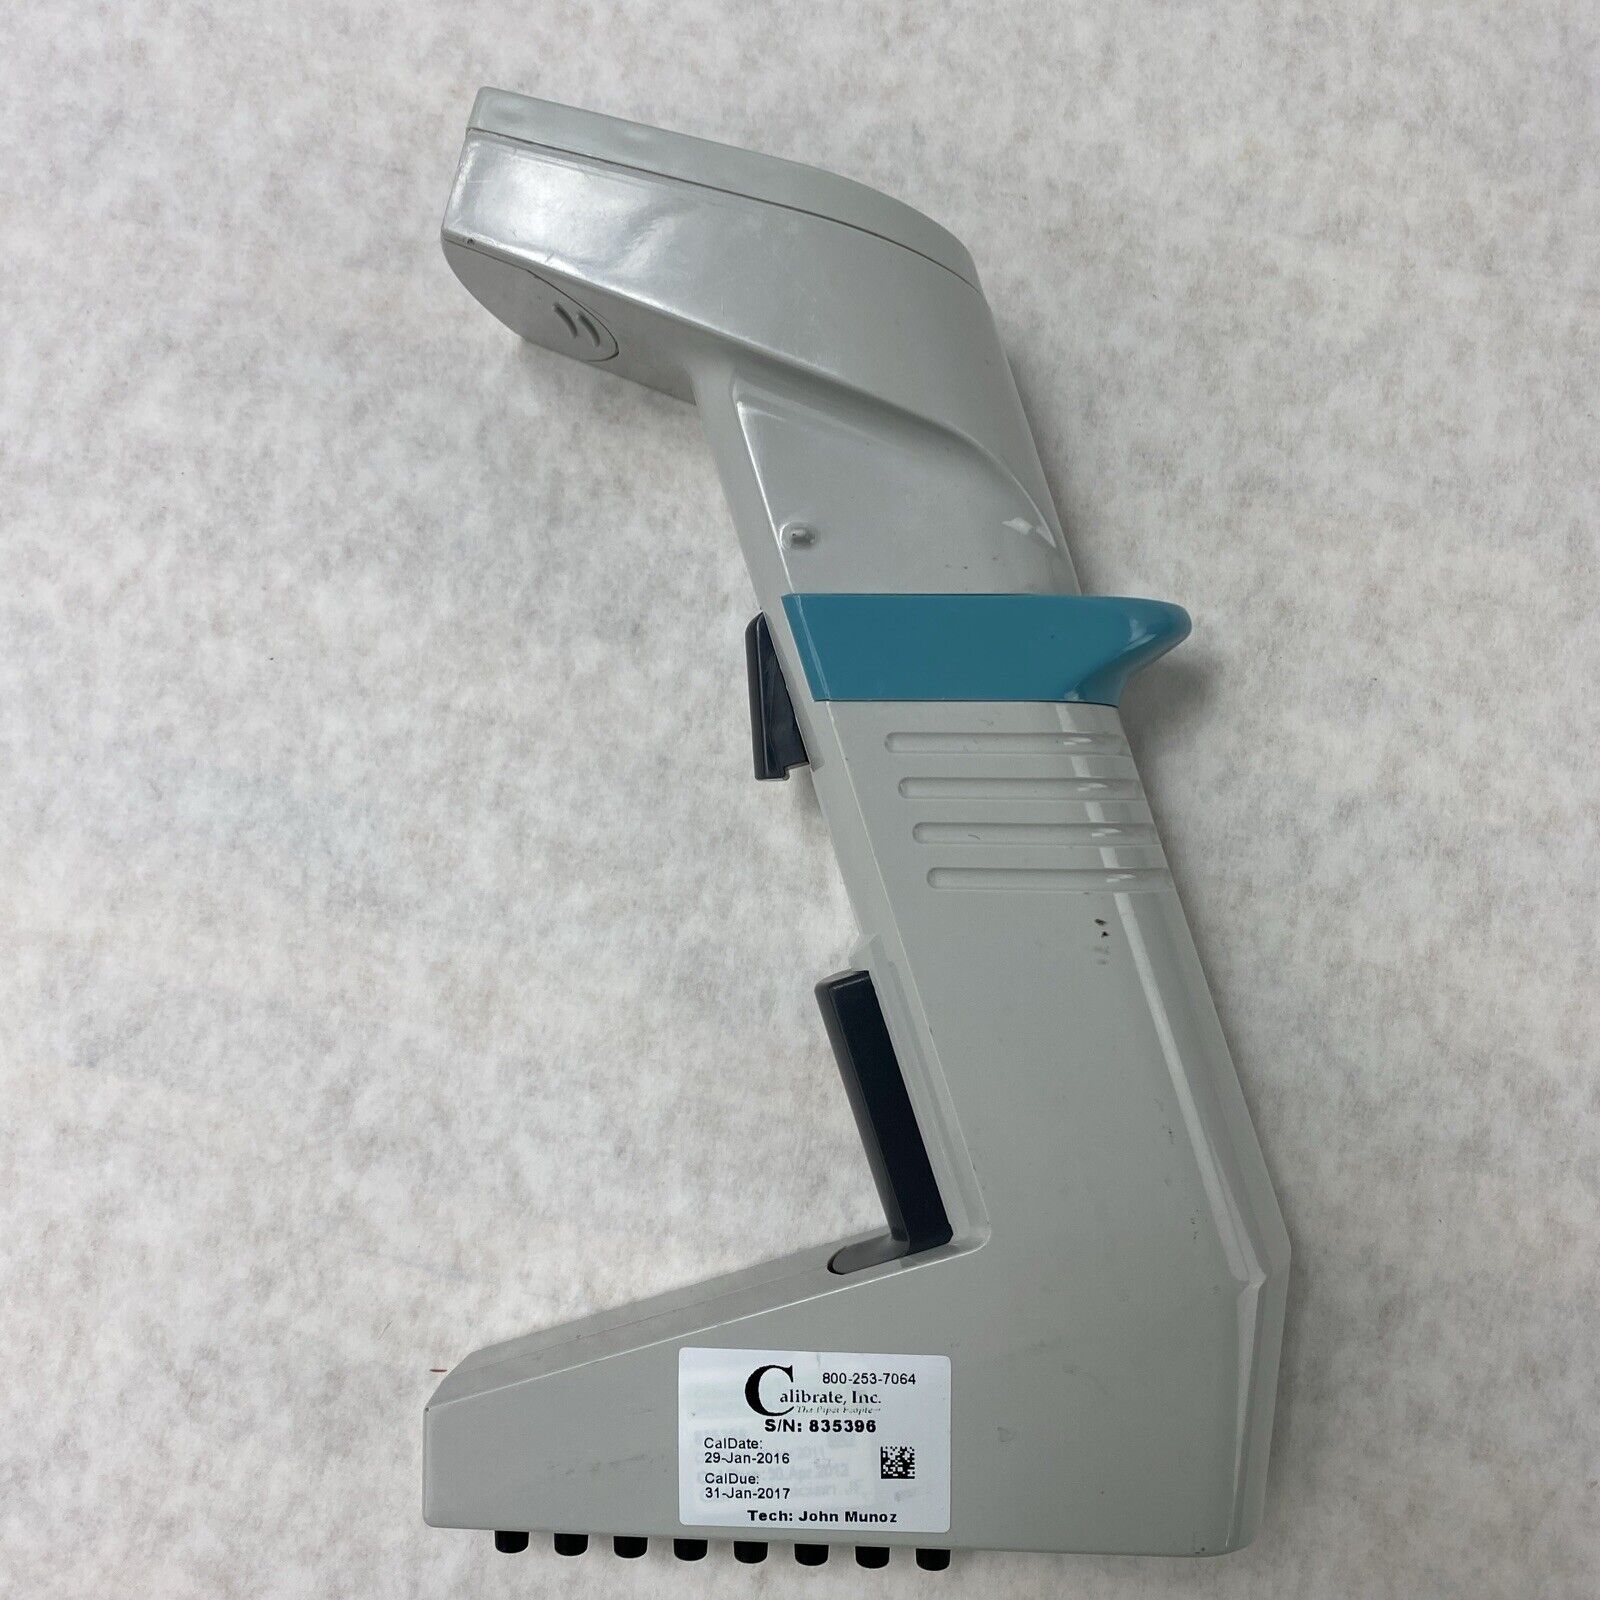 Matrix Impact2 250µl 16 Channel Electronic Pipette WITH Original POWER SUPPLY